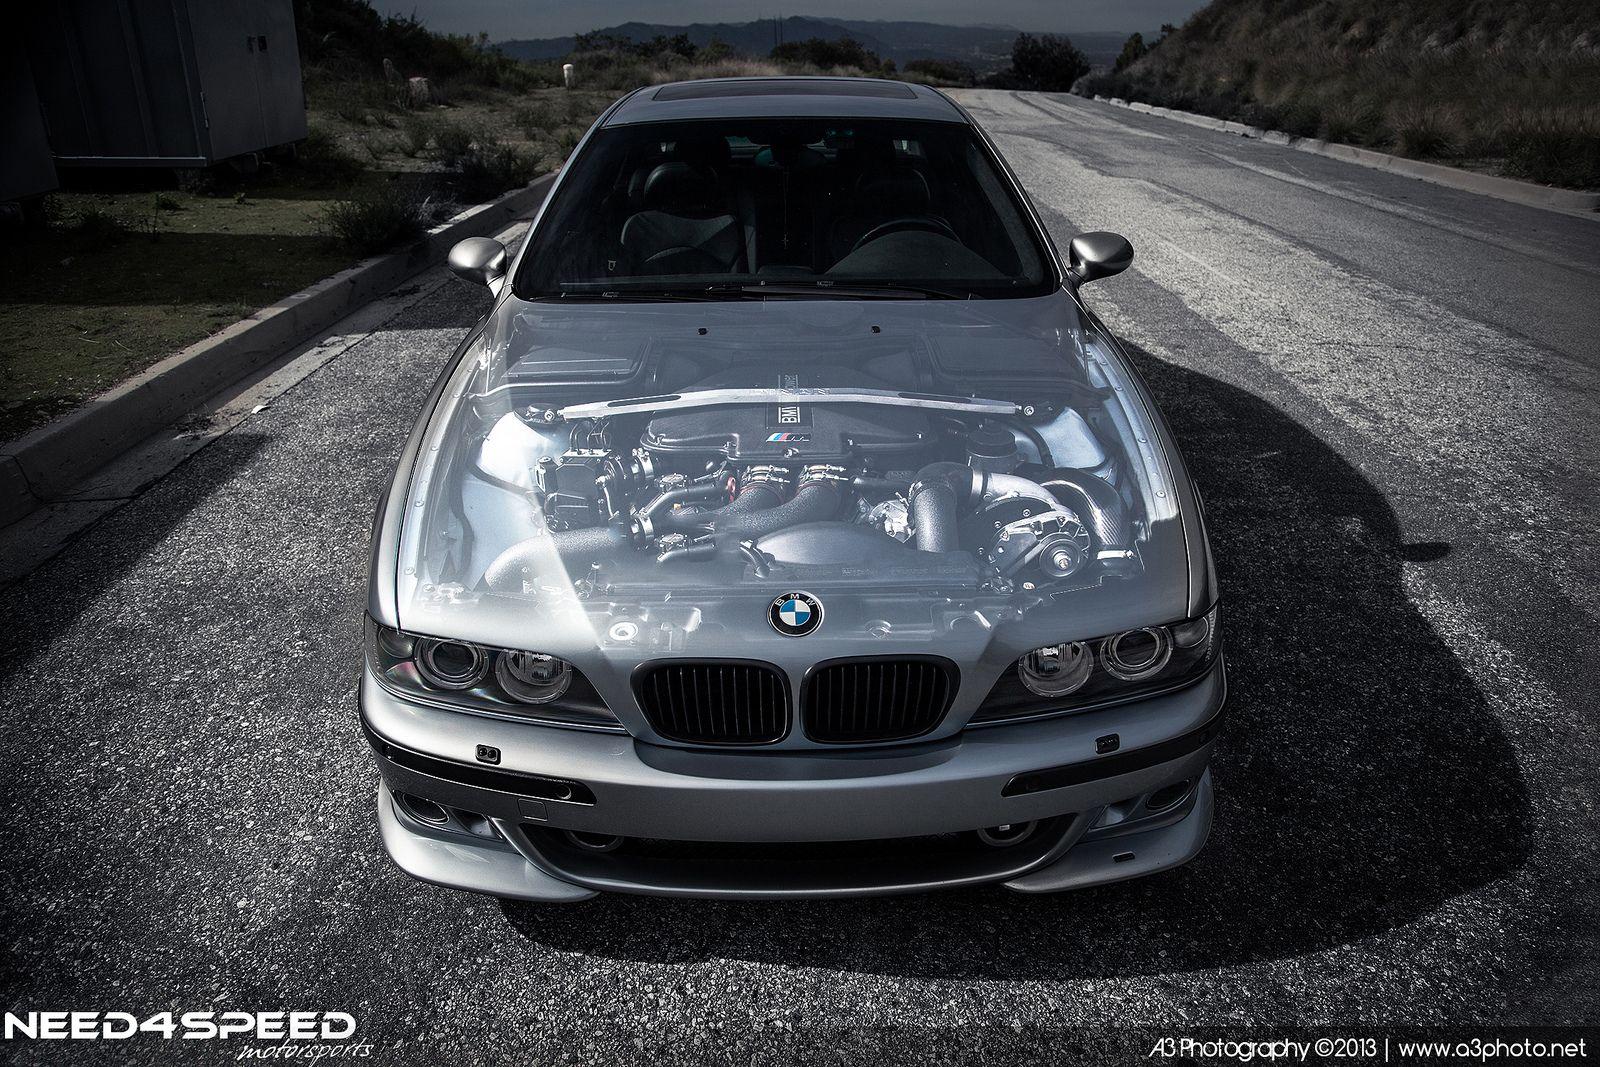 1600x1067px HQ res image of Bmw E39 71